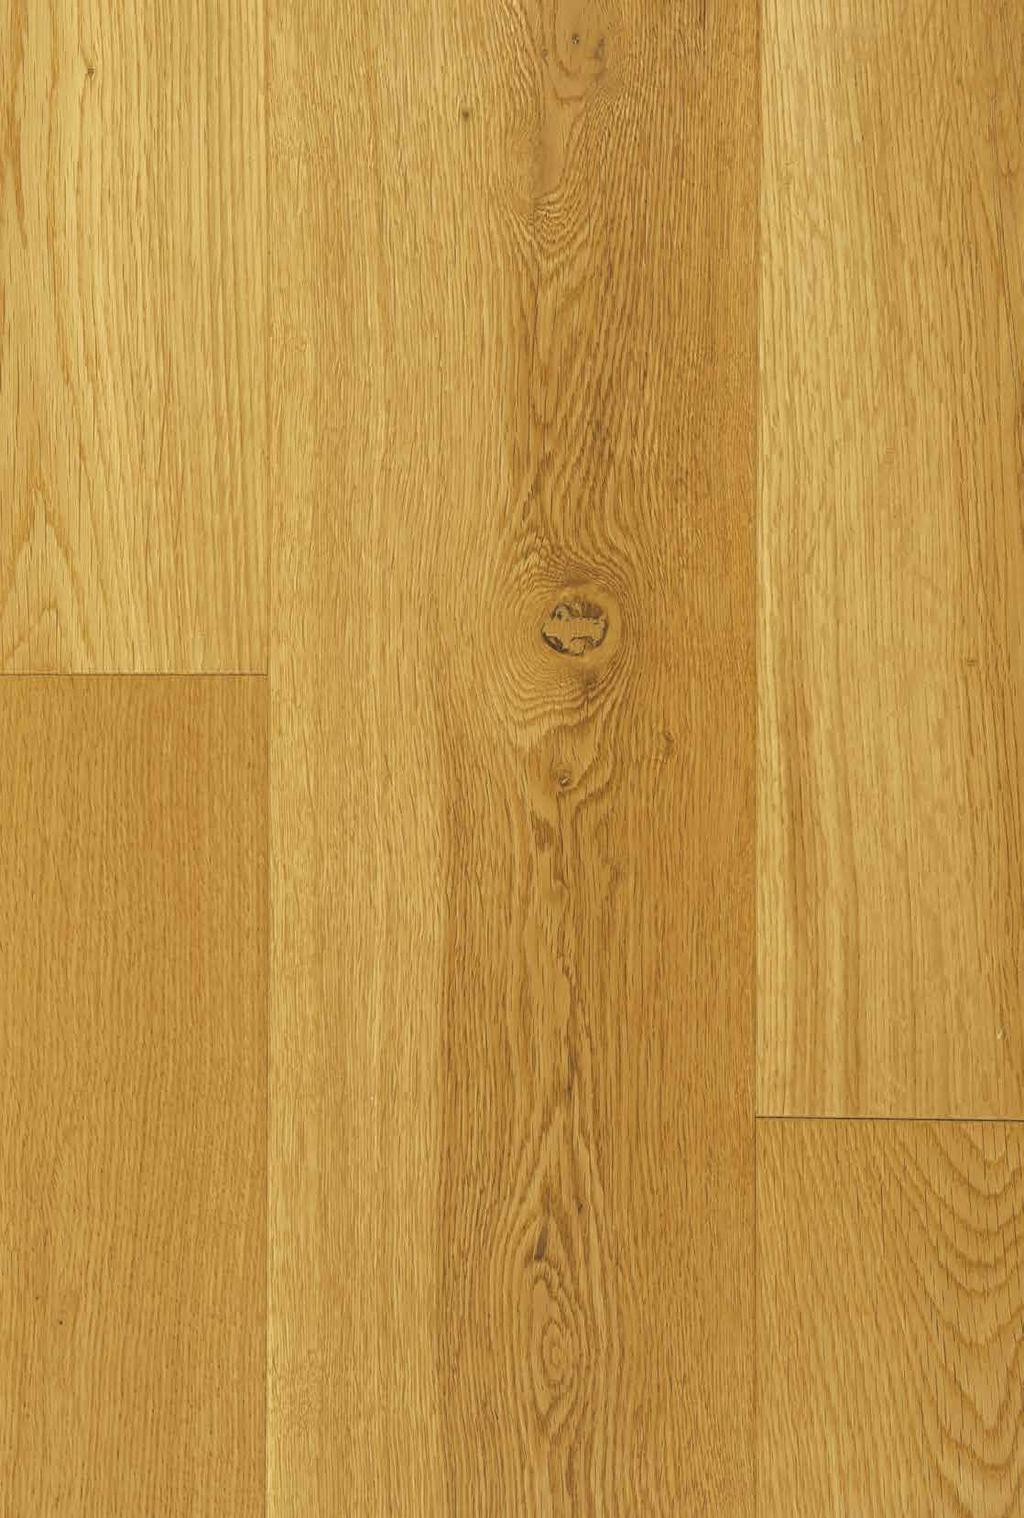 16 Unique Prefinished Hardwood Flooring Beveled Edges 2022 free download prefinished hardwood flooring beveled edges of wood flooring collection pdf inside please refer to pages 6 7 for icon key multiply